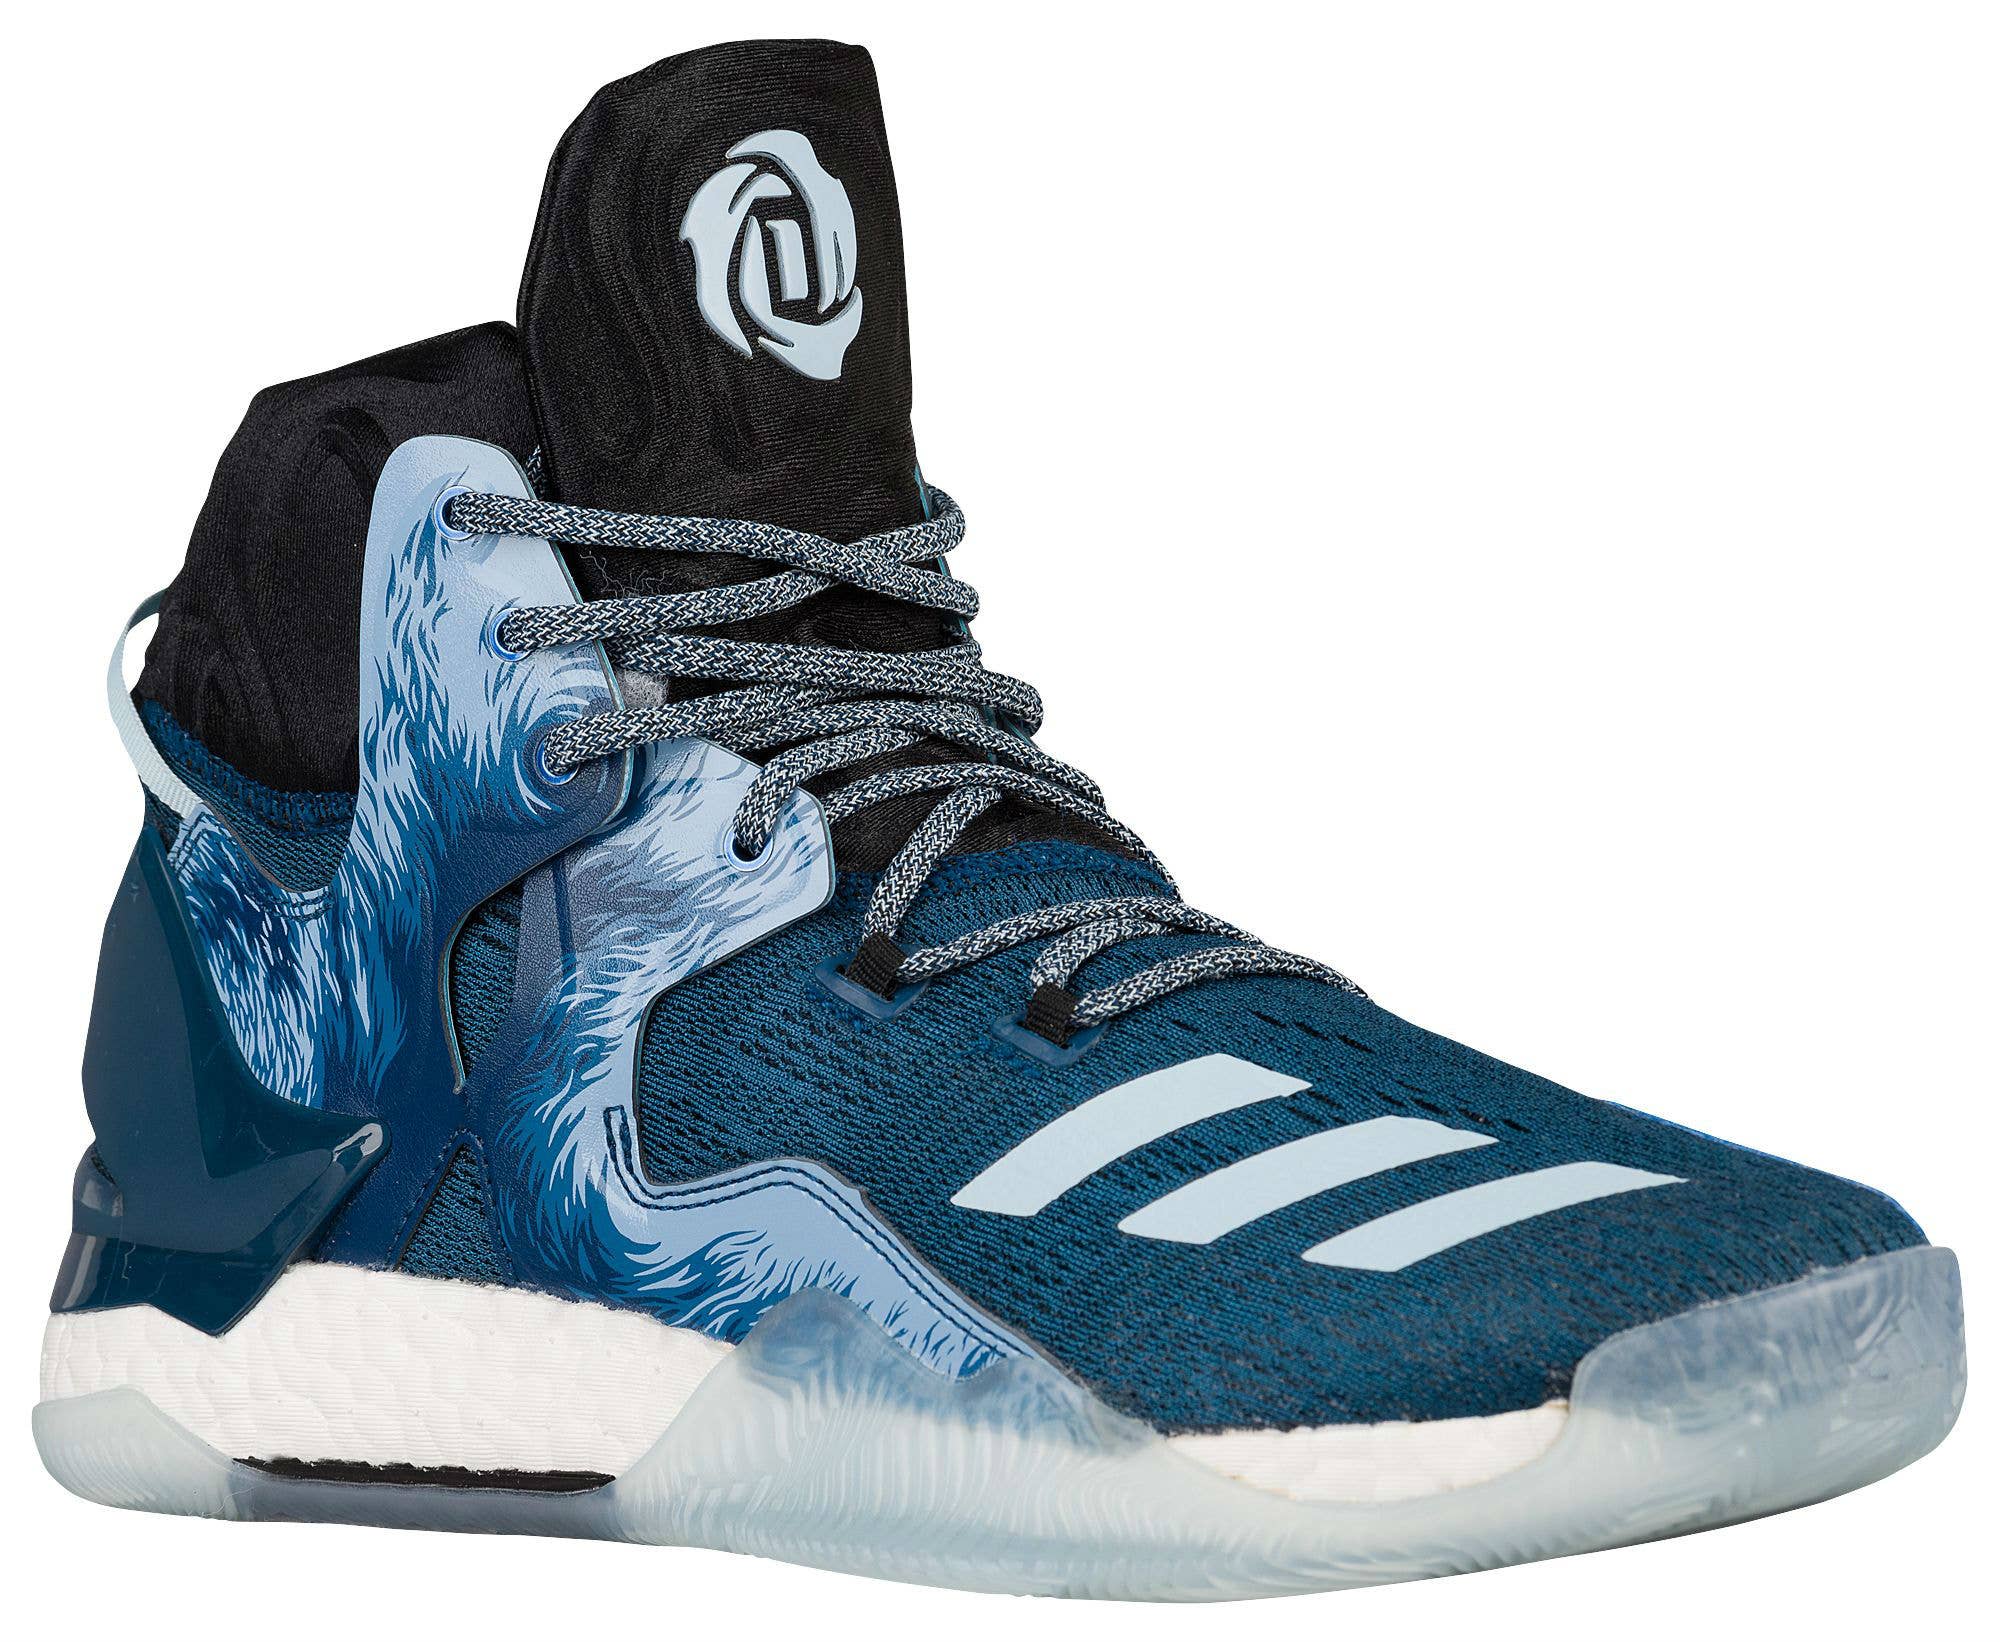 llenar mano ambición These May Be Derrick Rose's Sneakers for Halloween | Complex